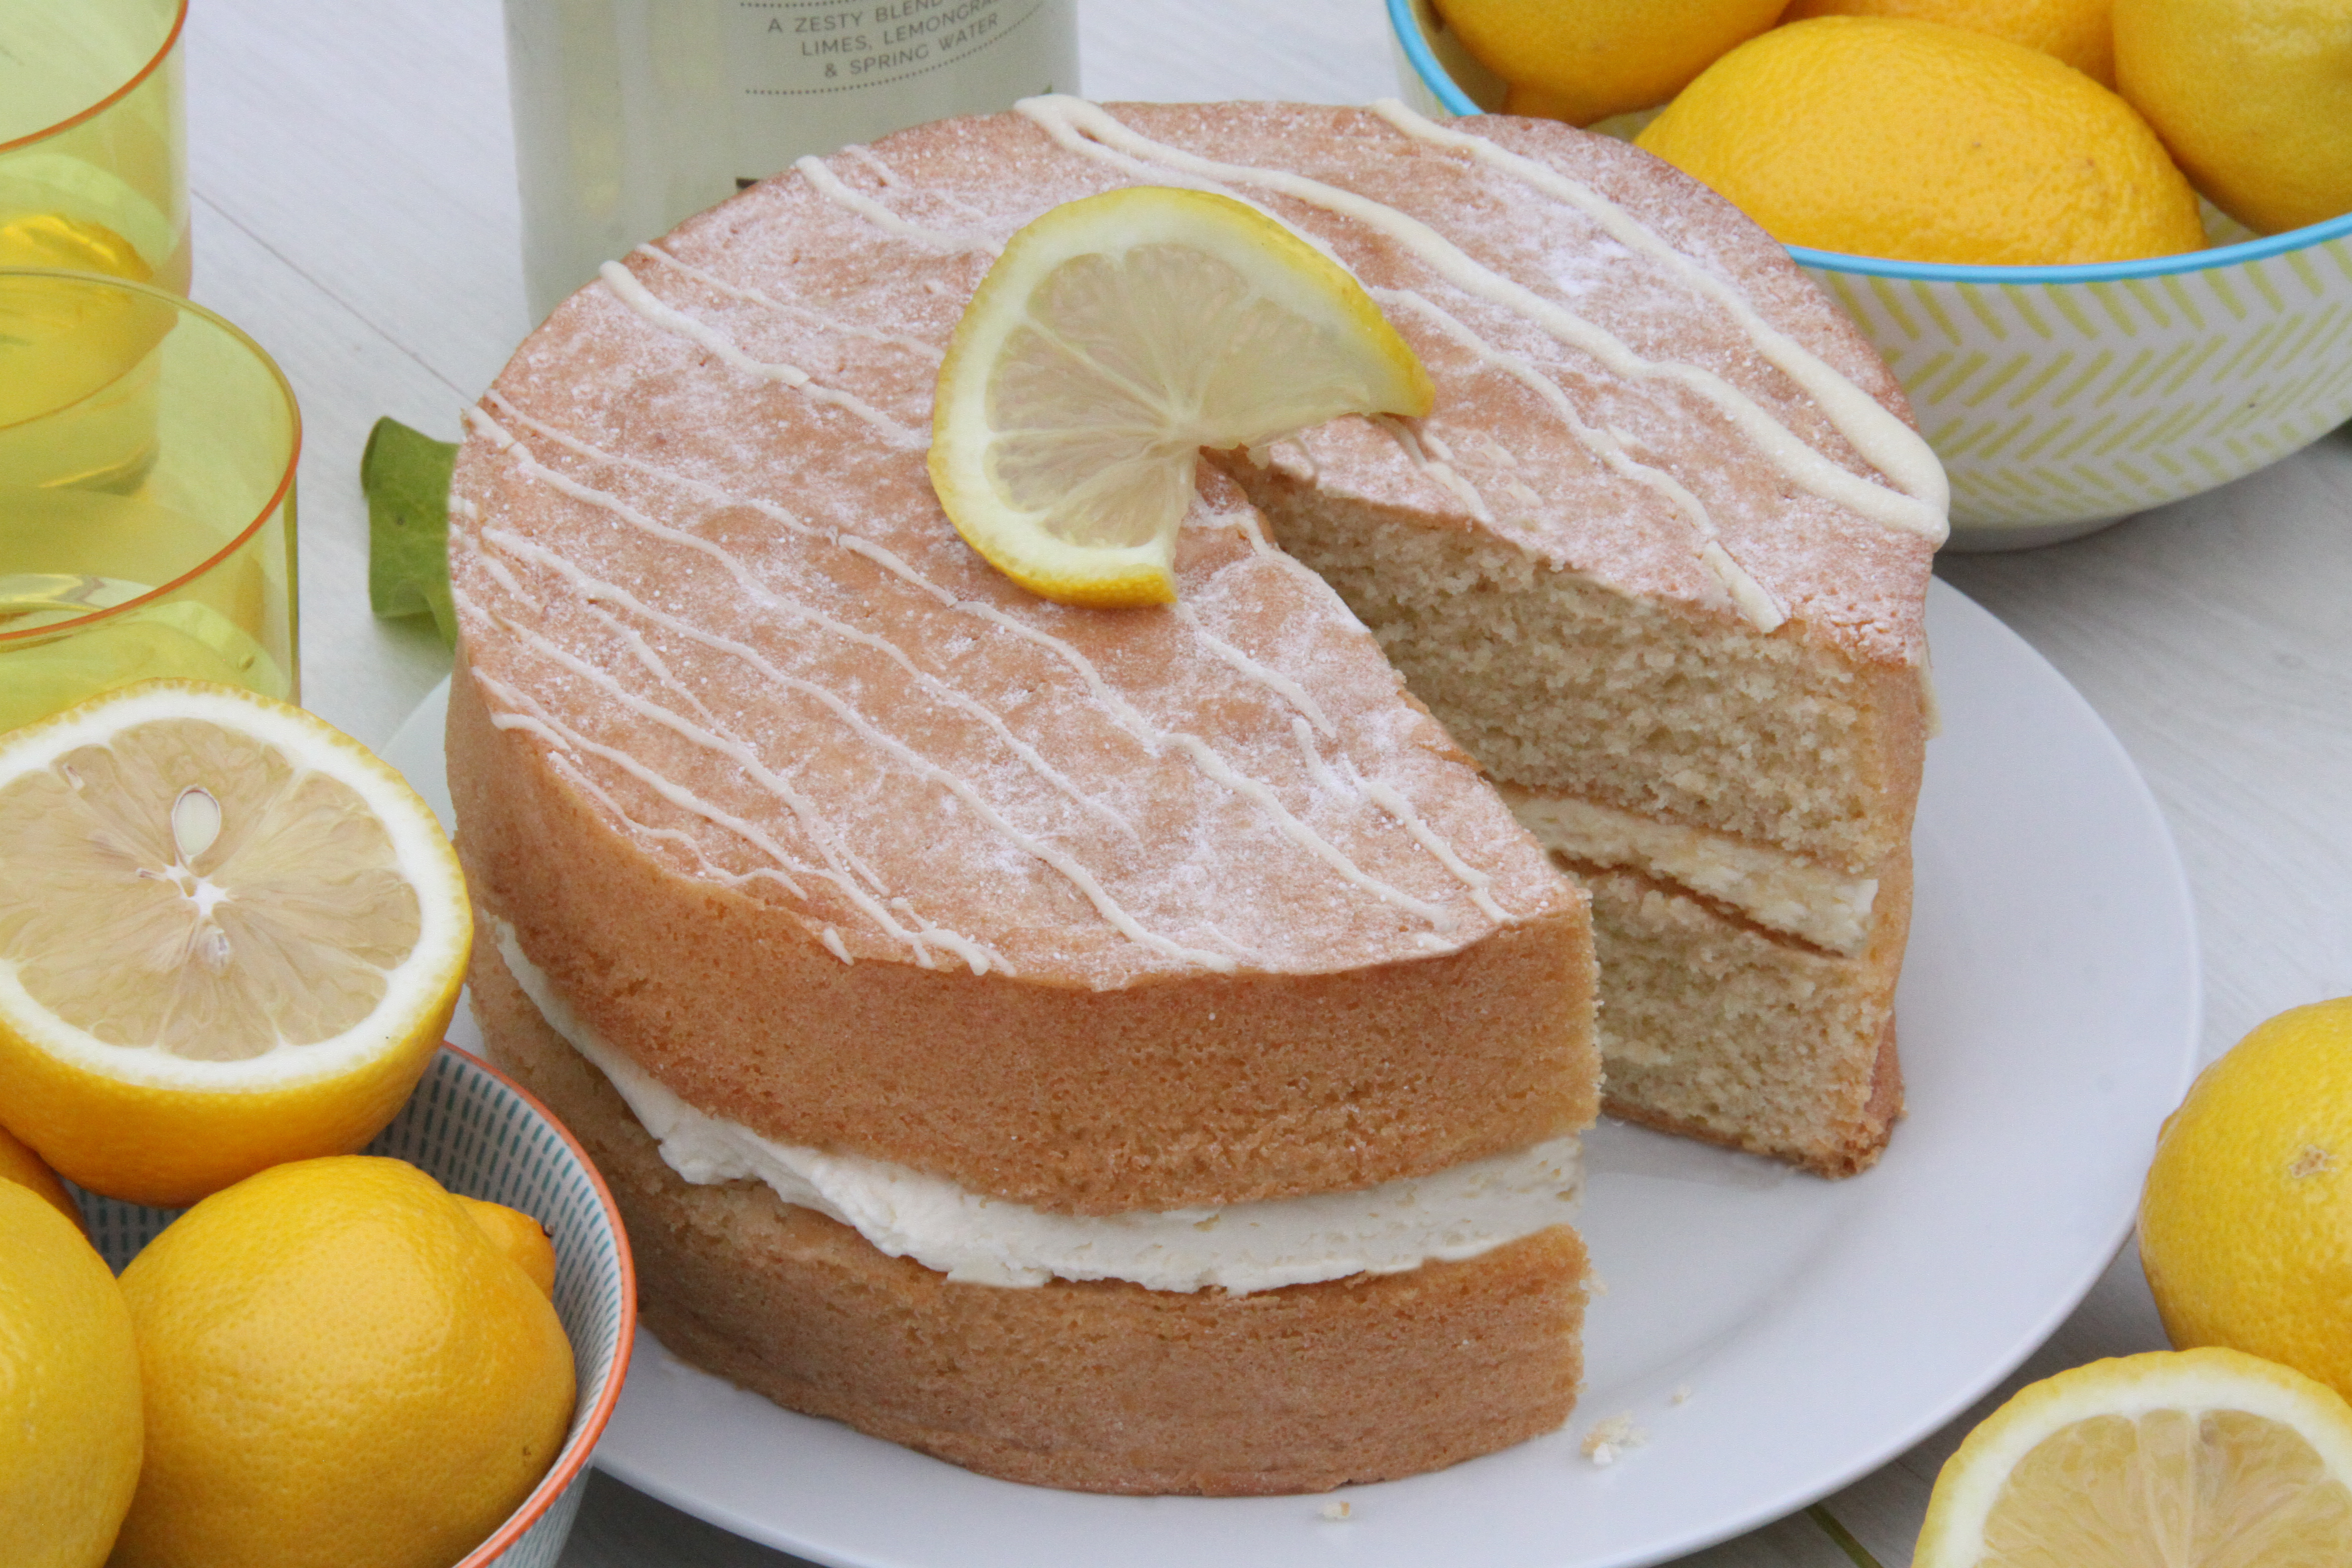 Celebrate the weekend with a Lemon SPONGE Friday! Order by Thursday 2pm for delivery Friday, use code: SpongeFriday, £9.99 for a 7 inch Sponge